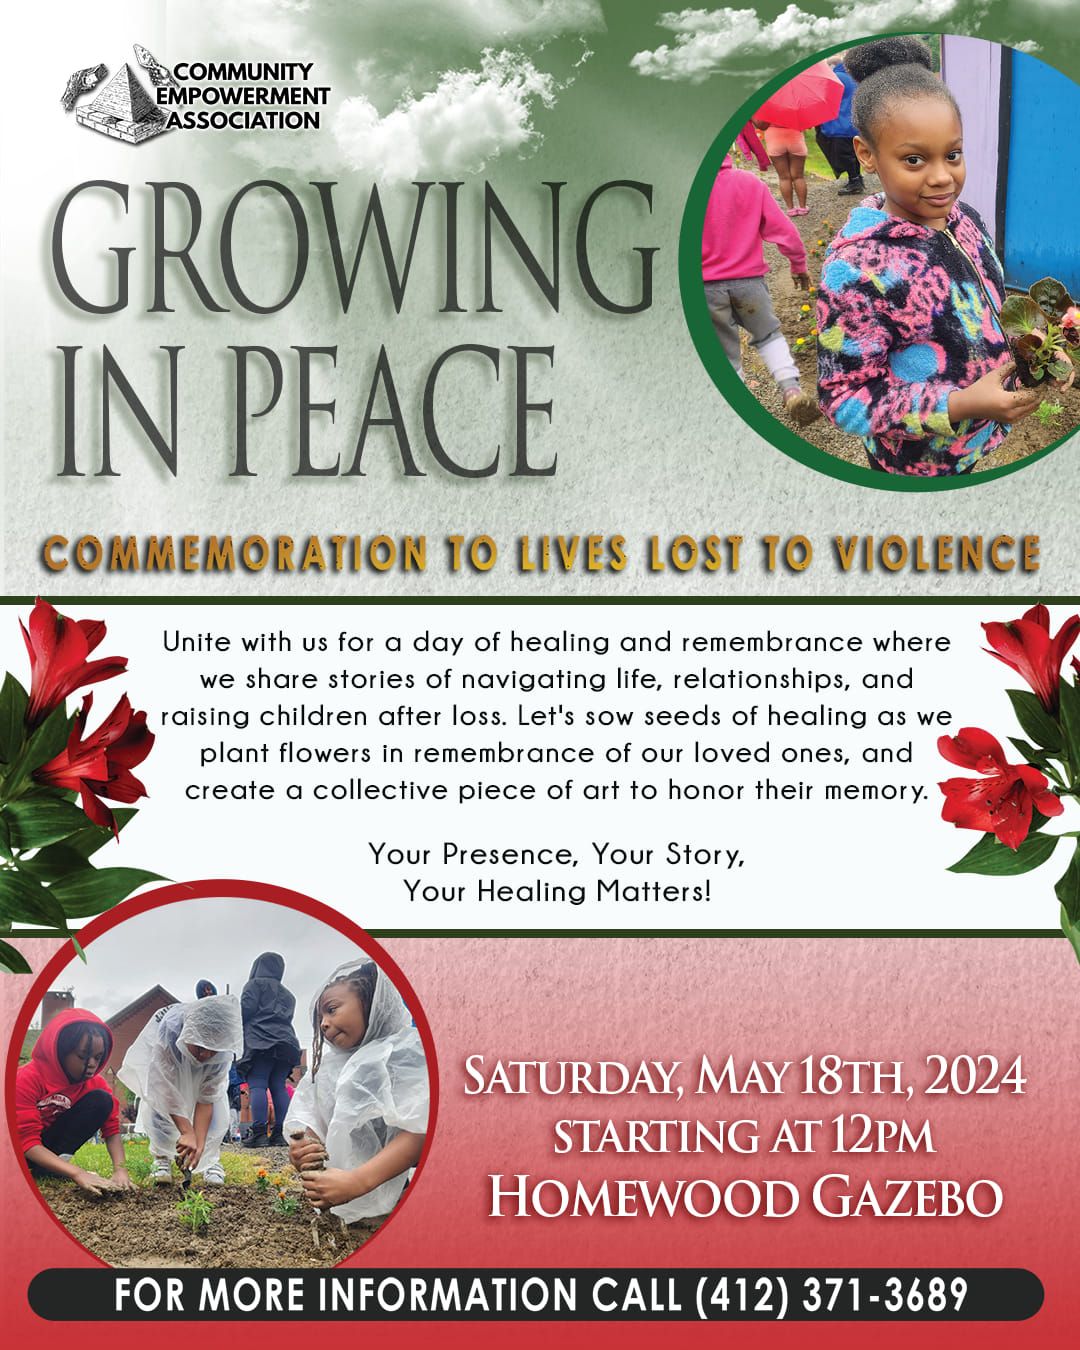 GROWING IN PEACE A COMMEMORATION TO LOVE ONES LOST TO VIOLENCE 